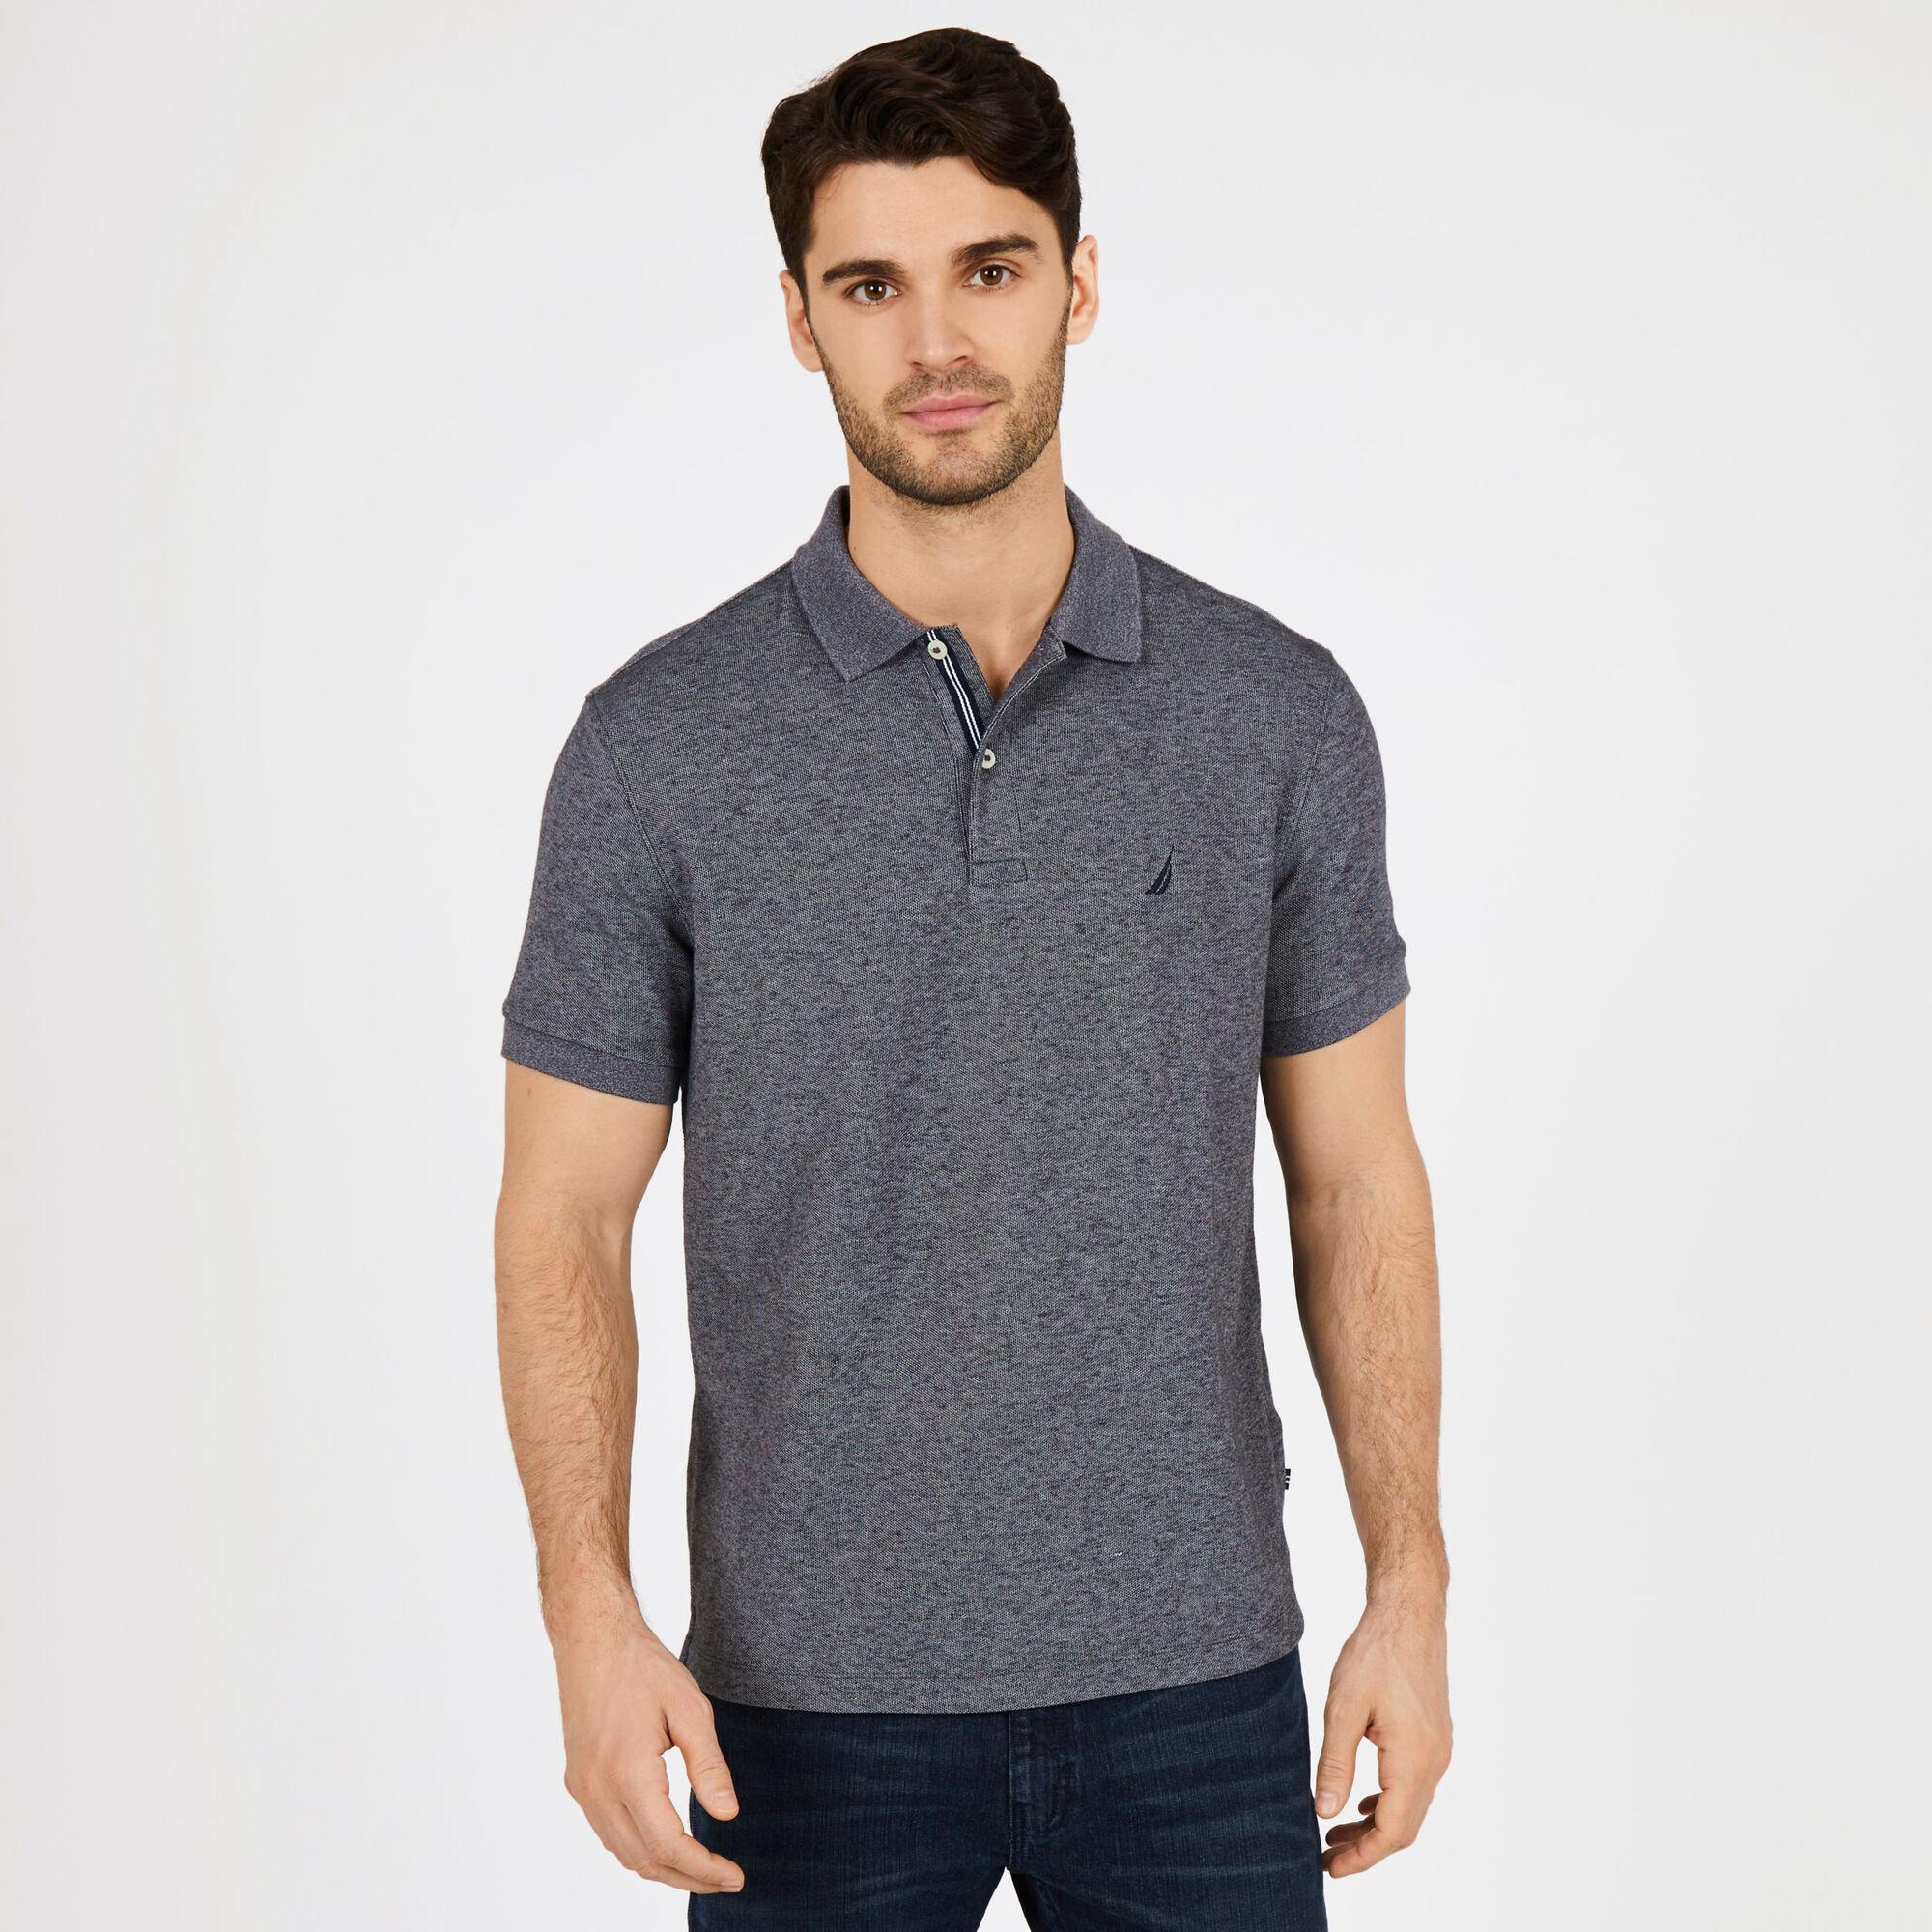  Anchor Solid Stretch Pique Polo Short Sleeve (B & T)